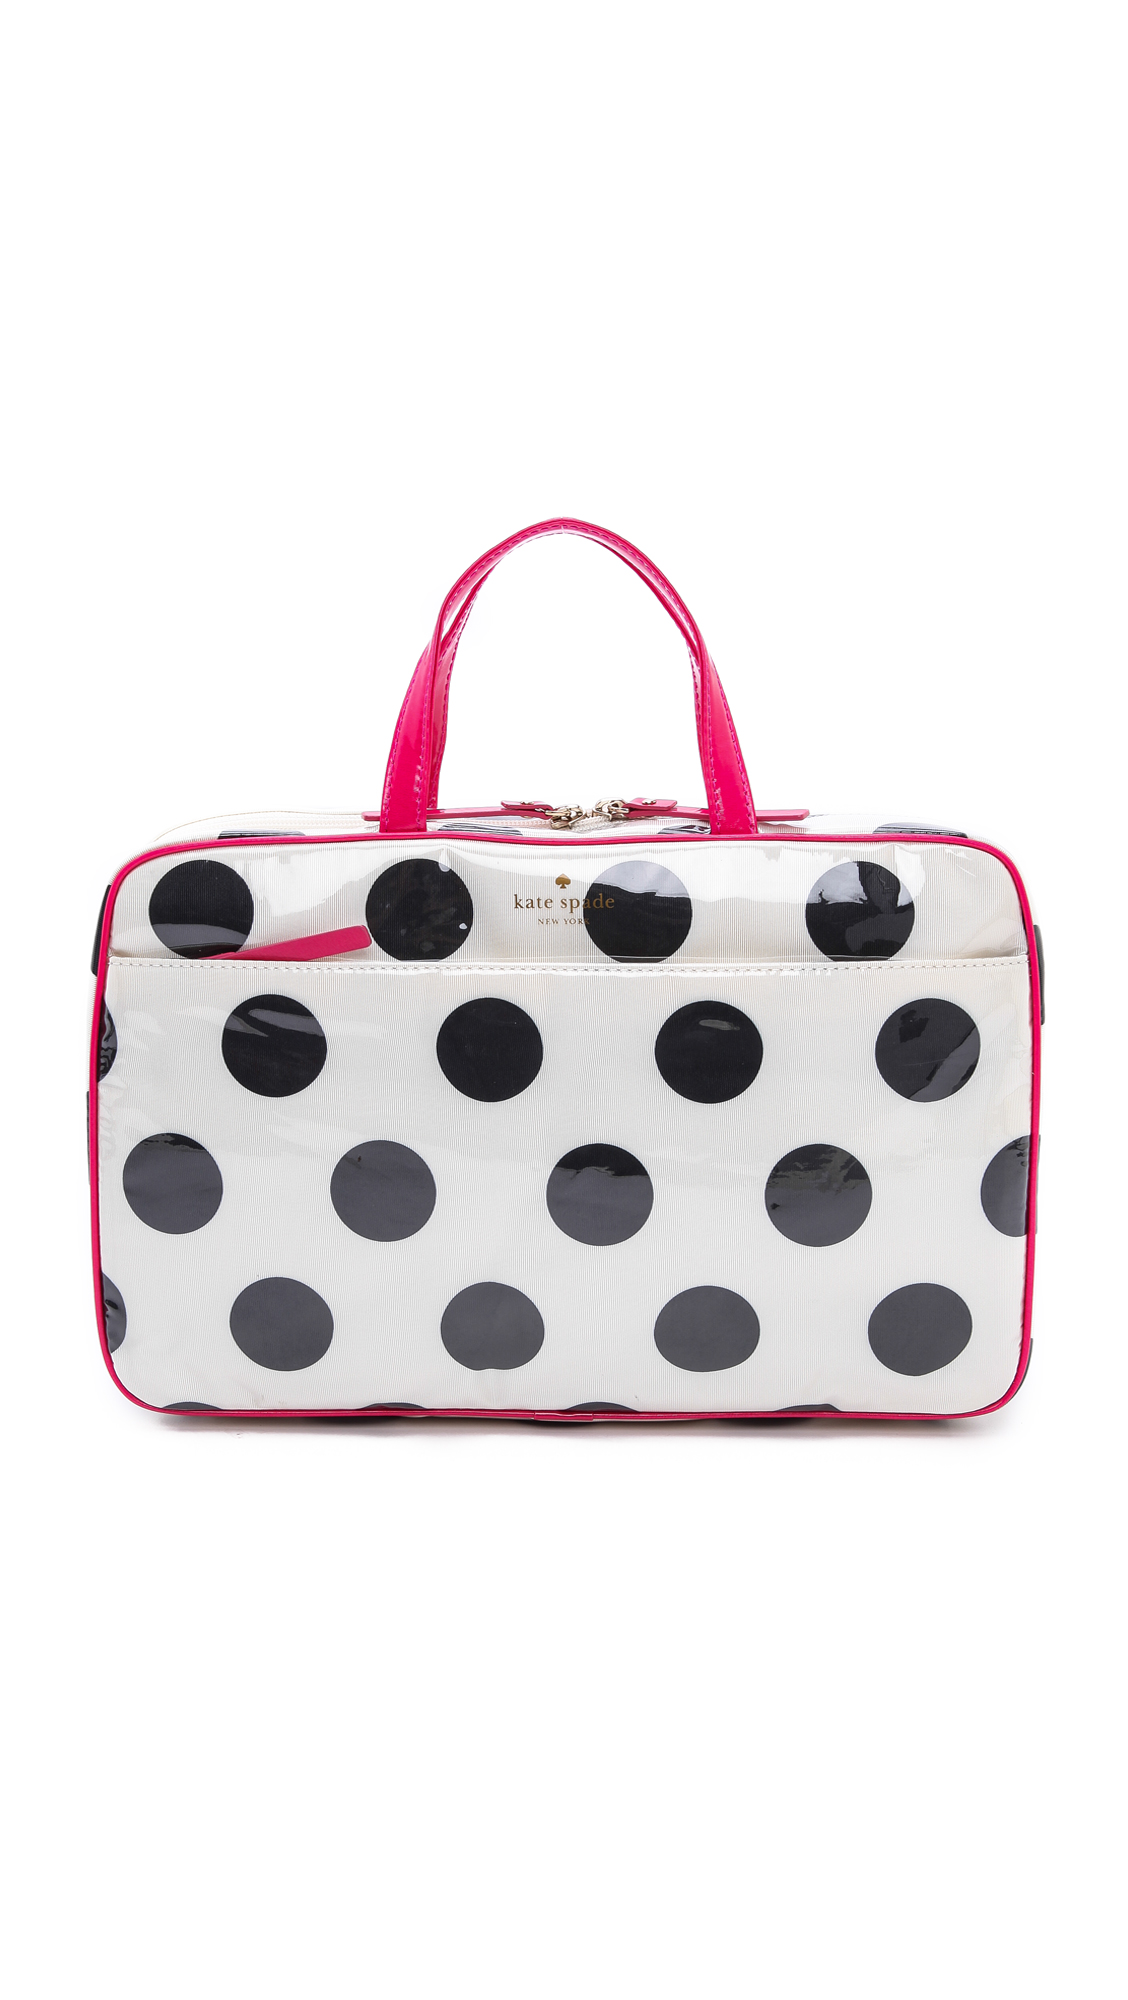 Kate Spade Le Pavillion Large Manuela Cosmetic Case in Pink | Lyst